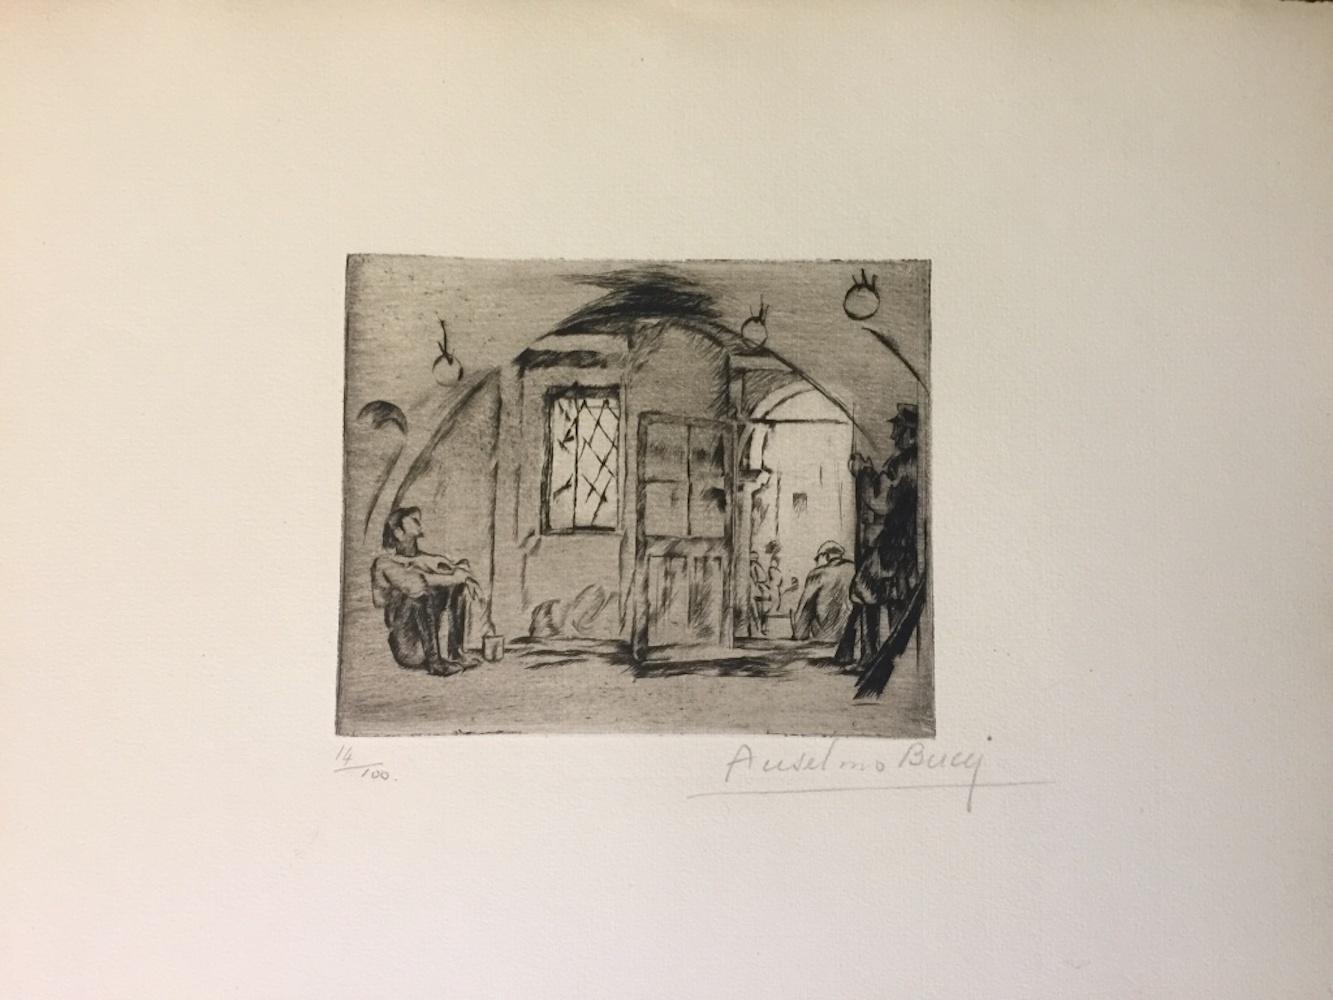 Image dimensions: 11.5 x 14 cm.

Hand signed. Edition of 100 prints on Hollande paper. From the collection: “Croquis du Front Italien” , published in Paris by D'Alignan editions. Anselmo Bucci was an Italian painter and printmaker.

He took part in